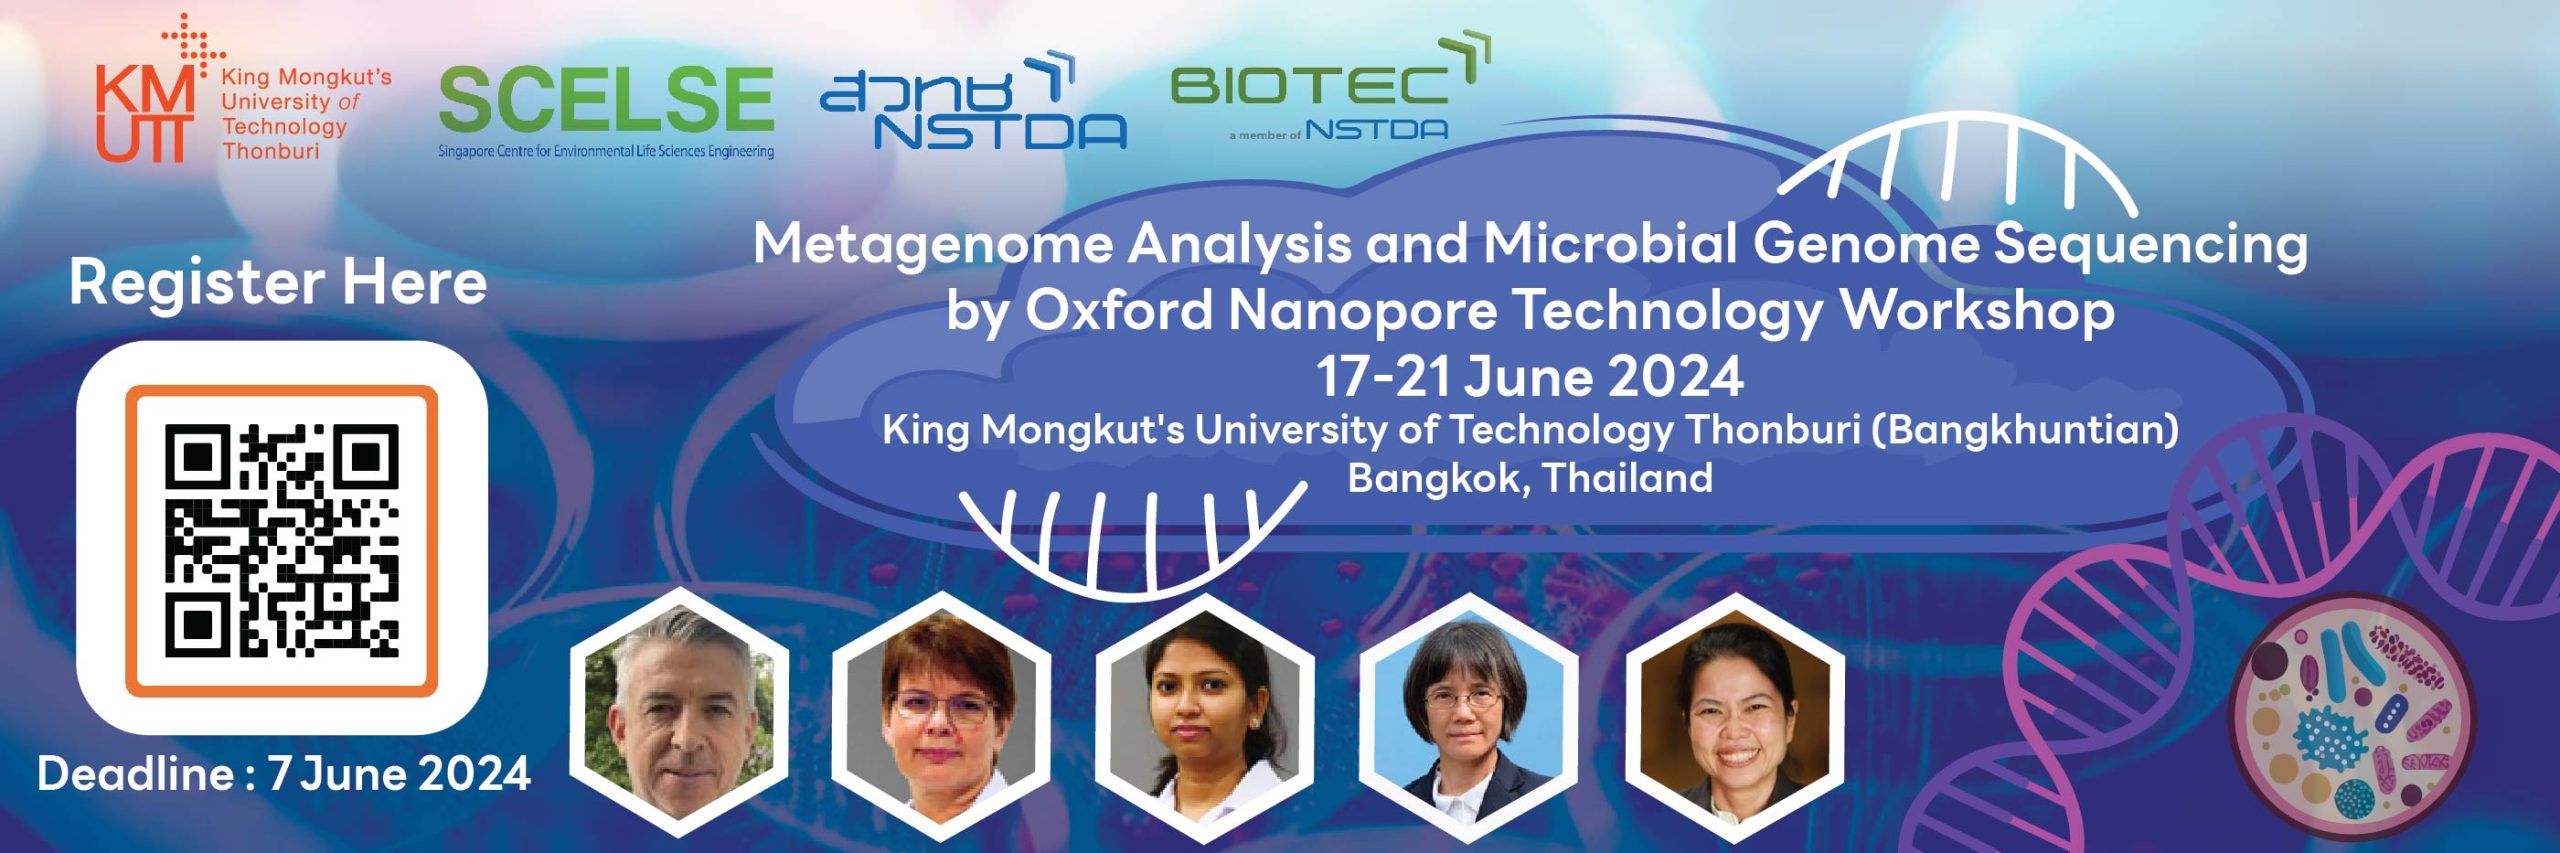 Metagenome Analysis and Microbial Genome Sequencing by Oxford Nanopore Technology Workshop 17-21 June 2024